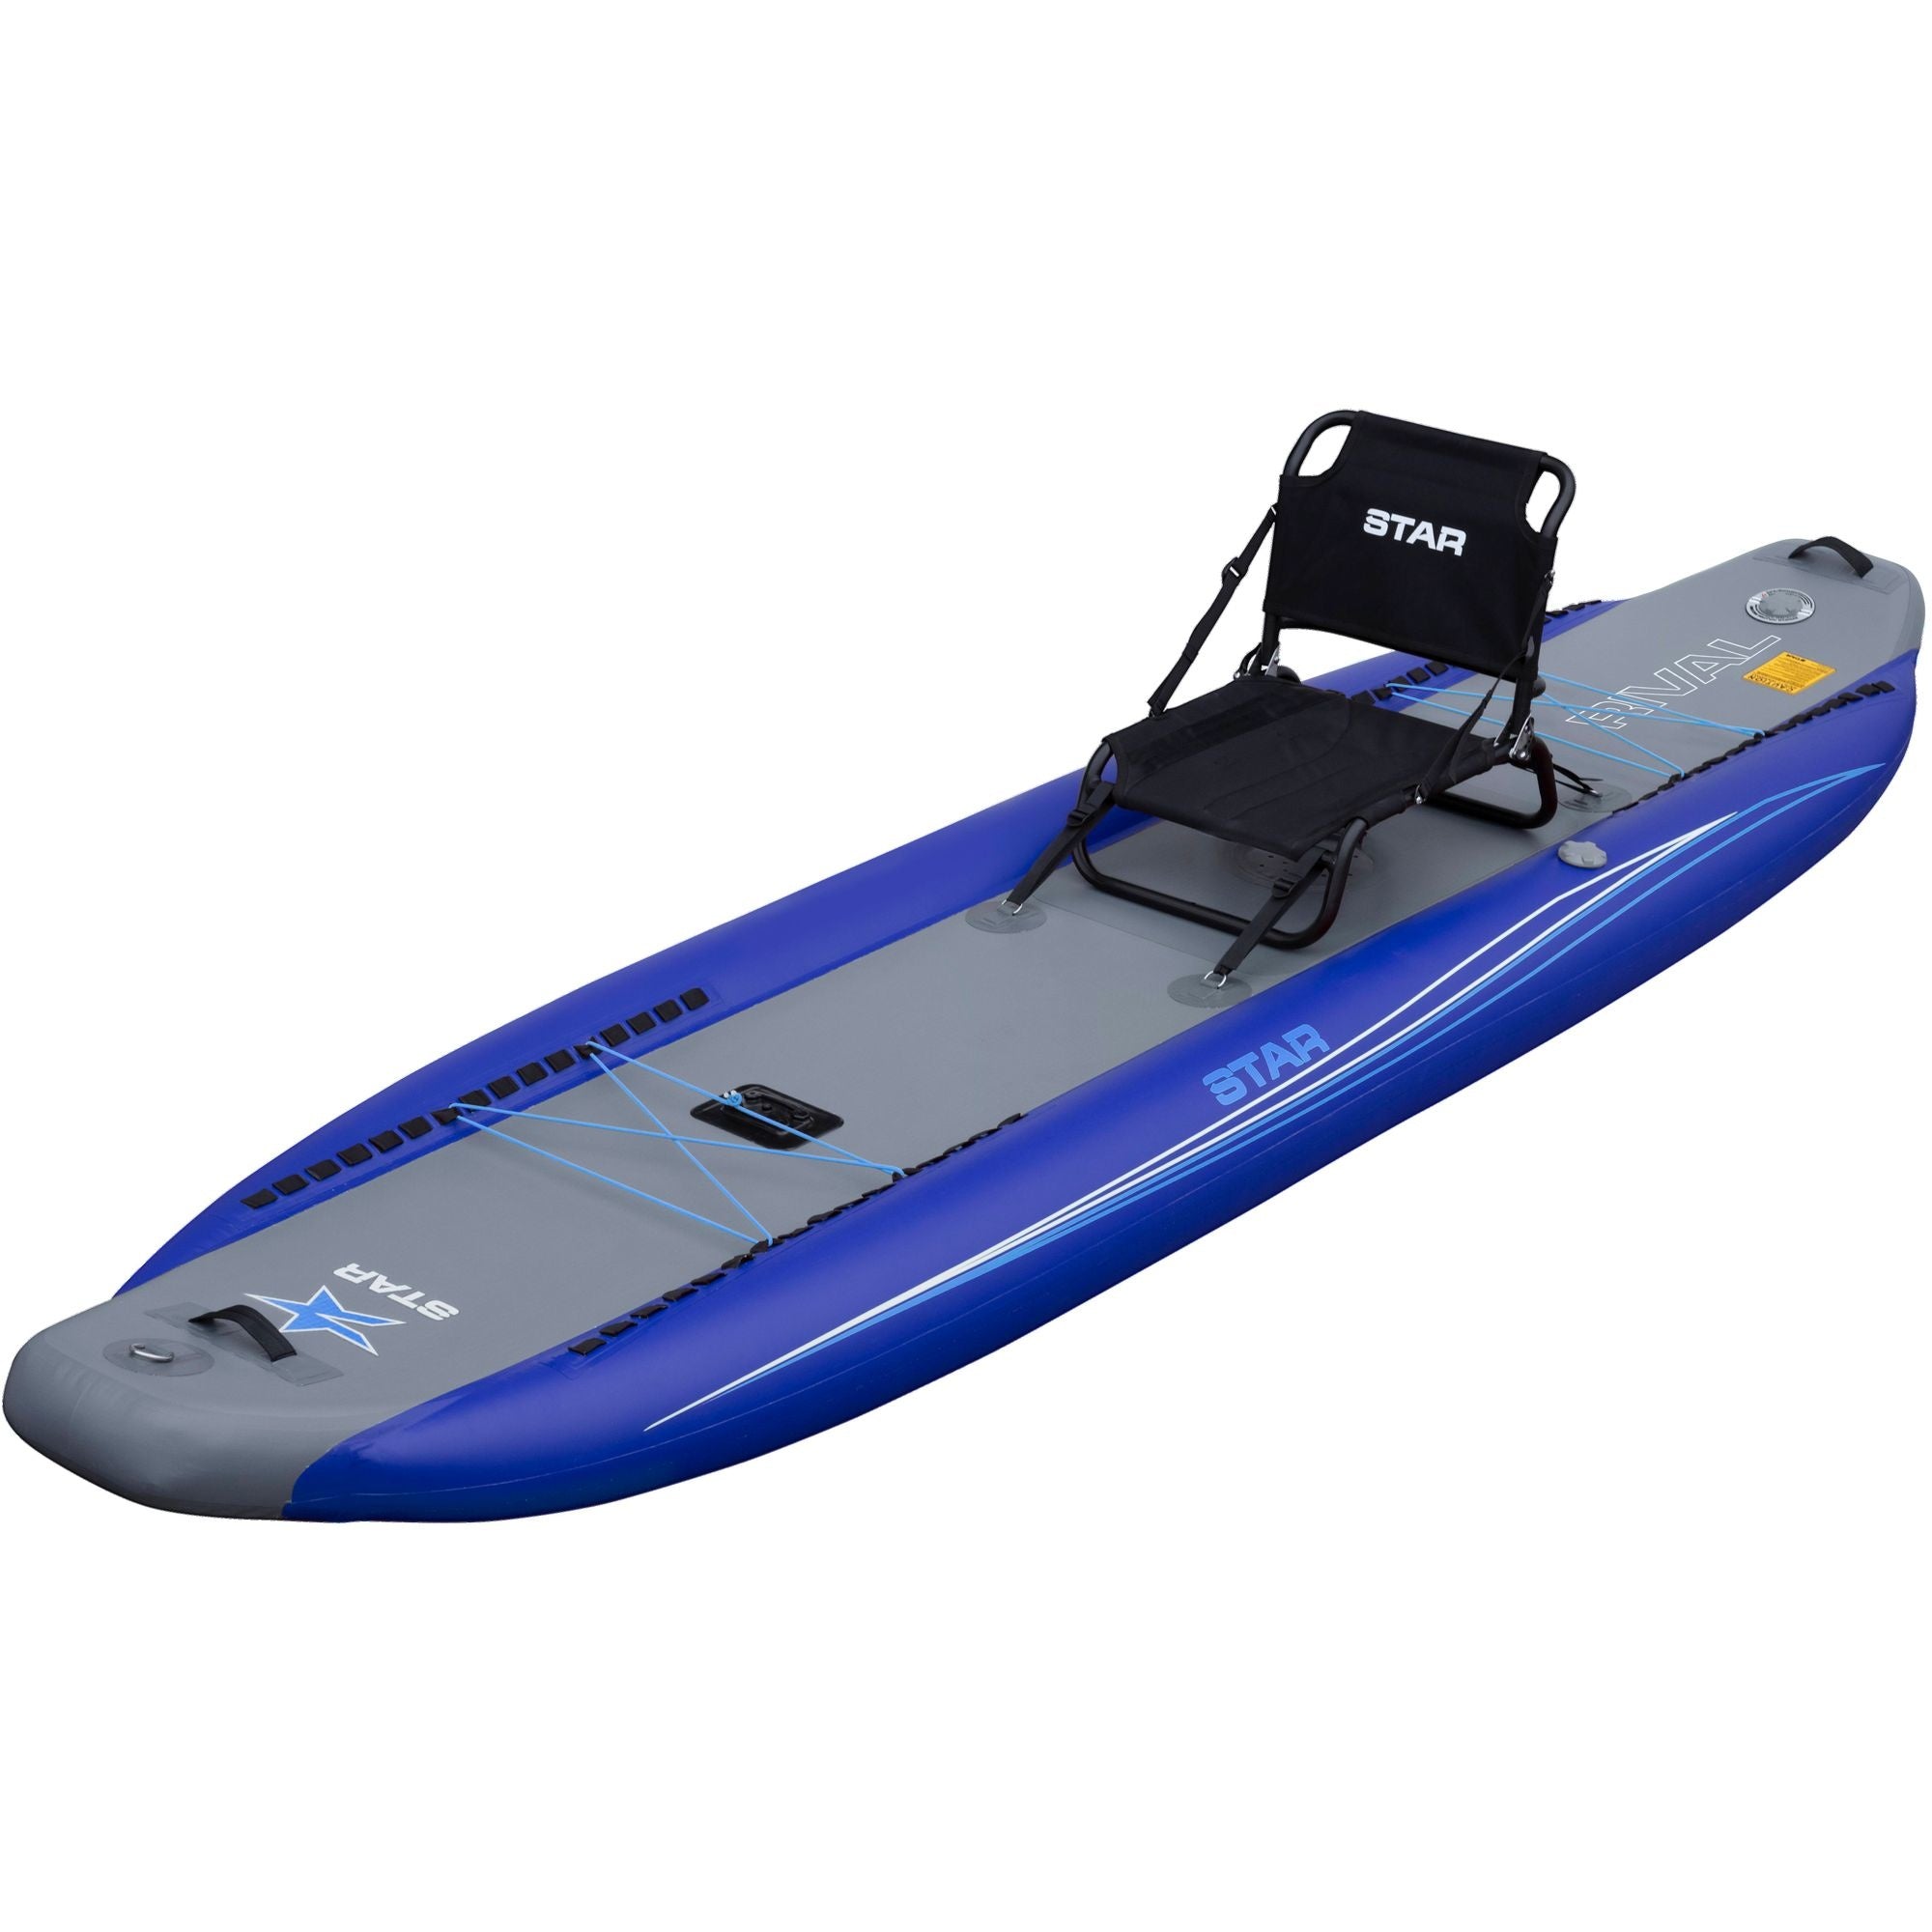 STAR - Rival Inflatable Kayak, Blue